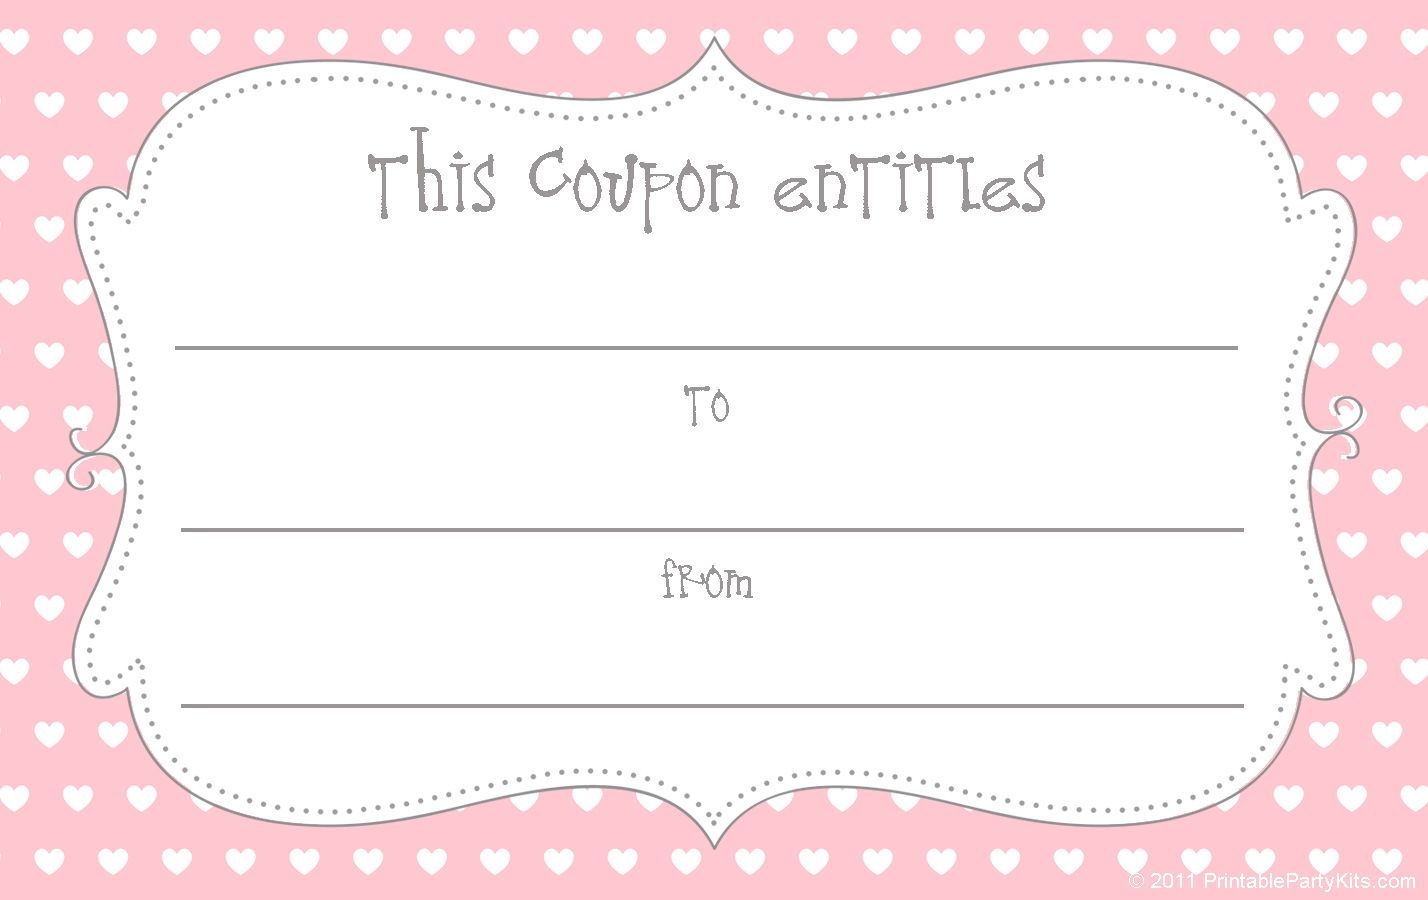 15 Sets Of Free Printable Love Coupons And Templates - Free Printable Date Night Coupon